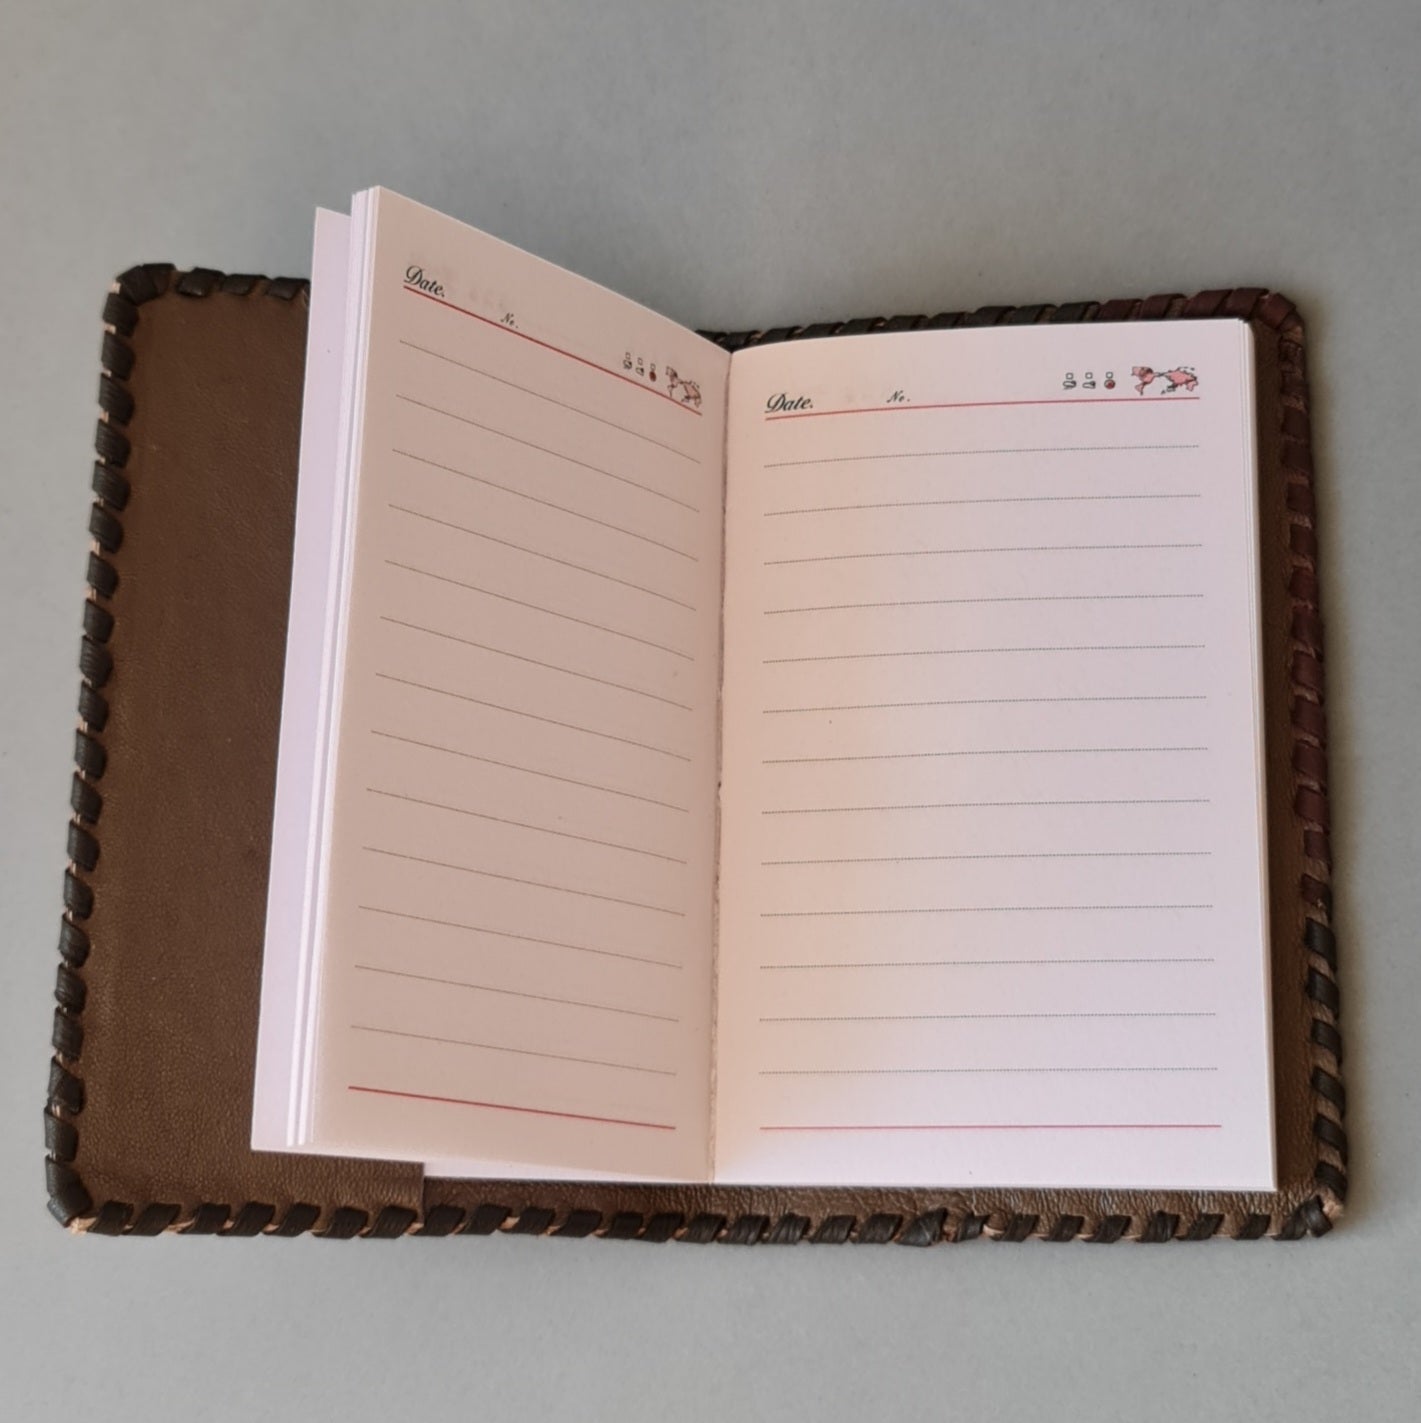 Diary. The calendar part is changeable. Brown leather covers. 8 x 13 cm (MAPL)